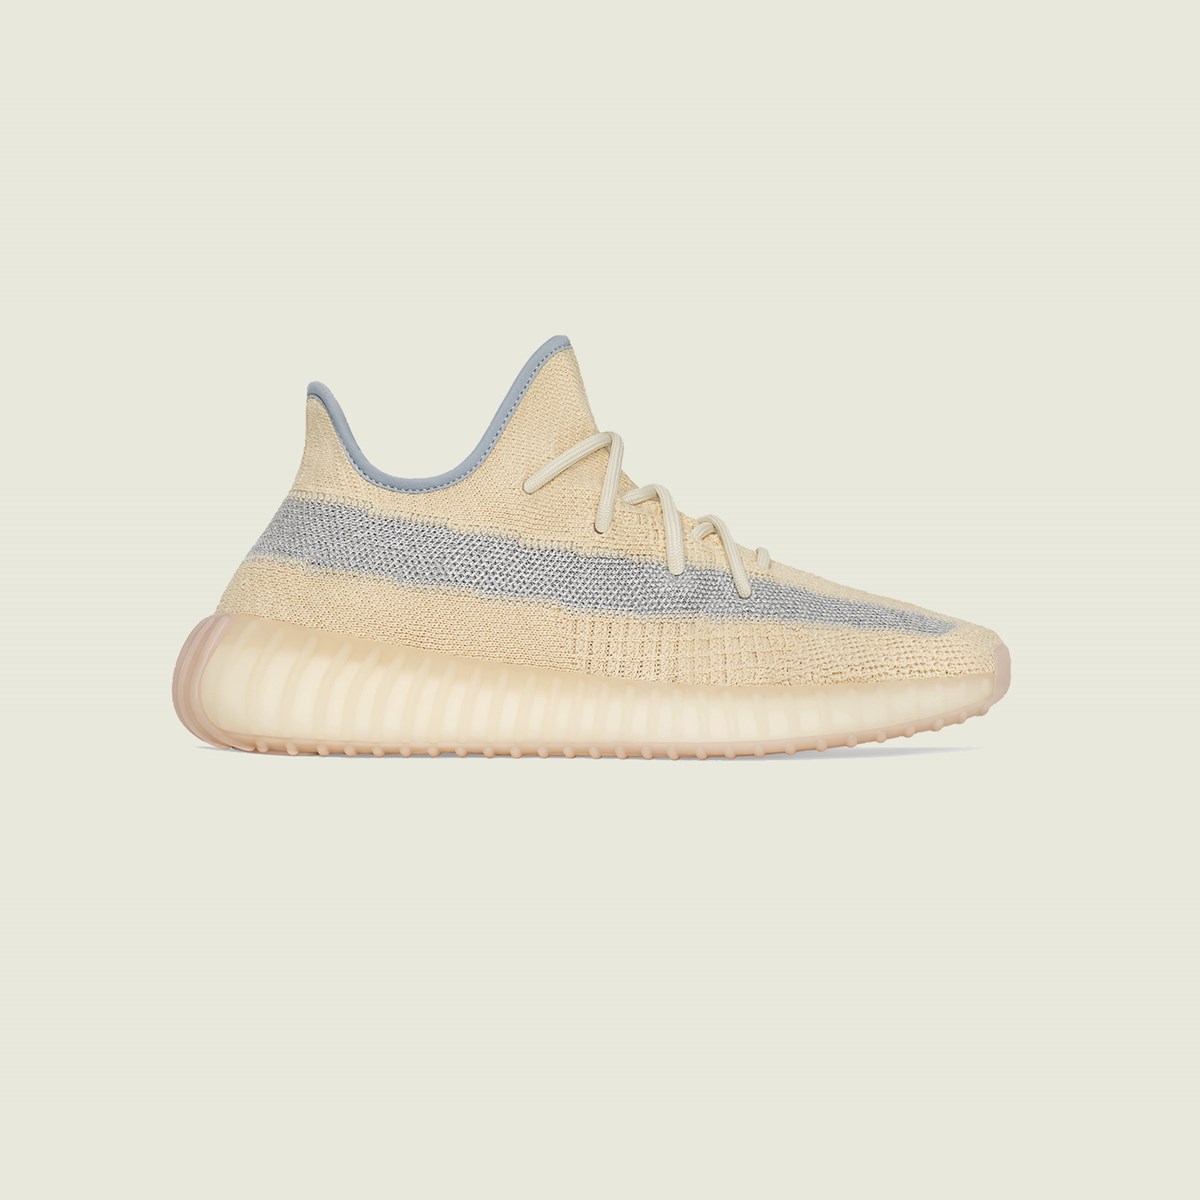 Yeezy Boost 350 V2 FY5158